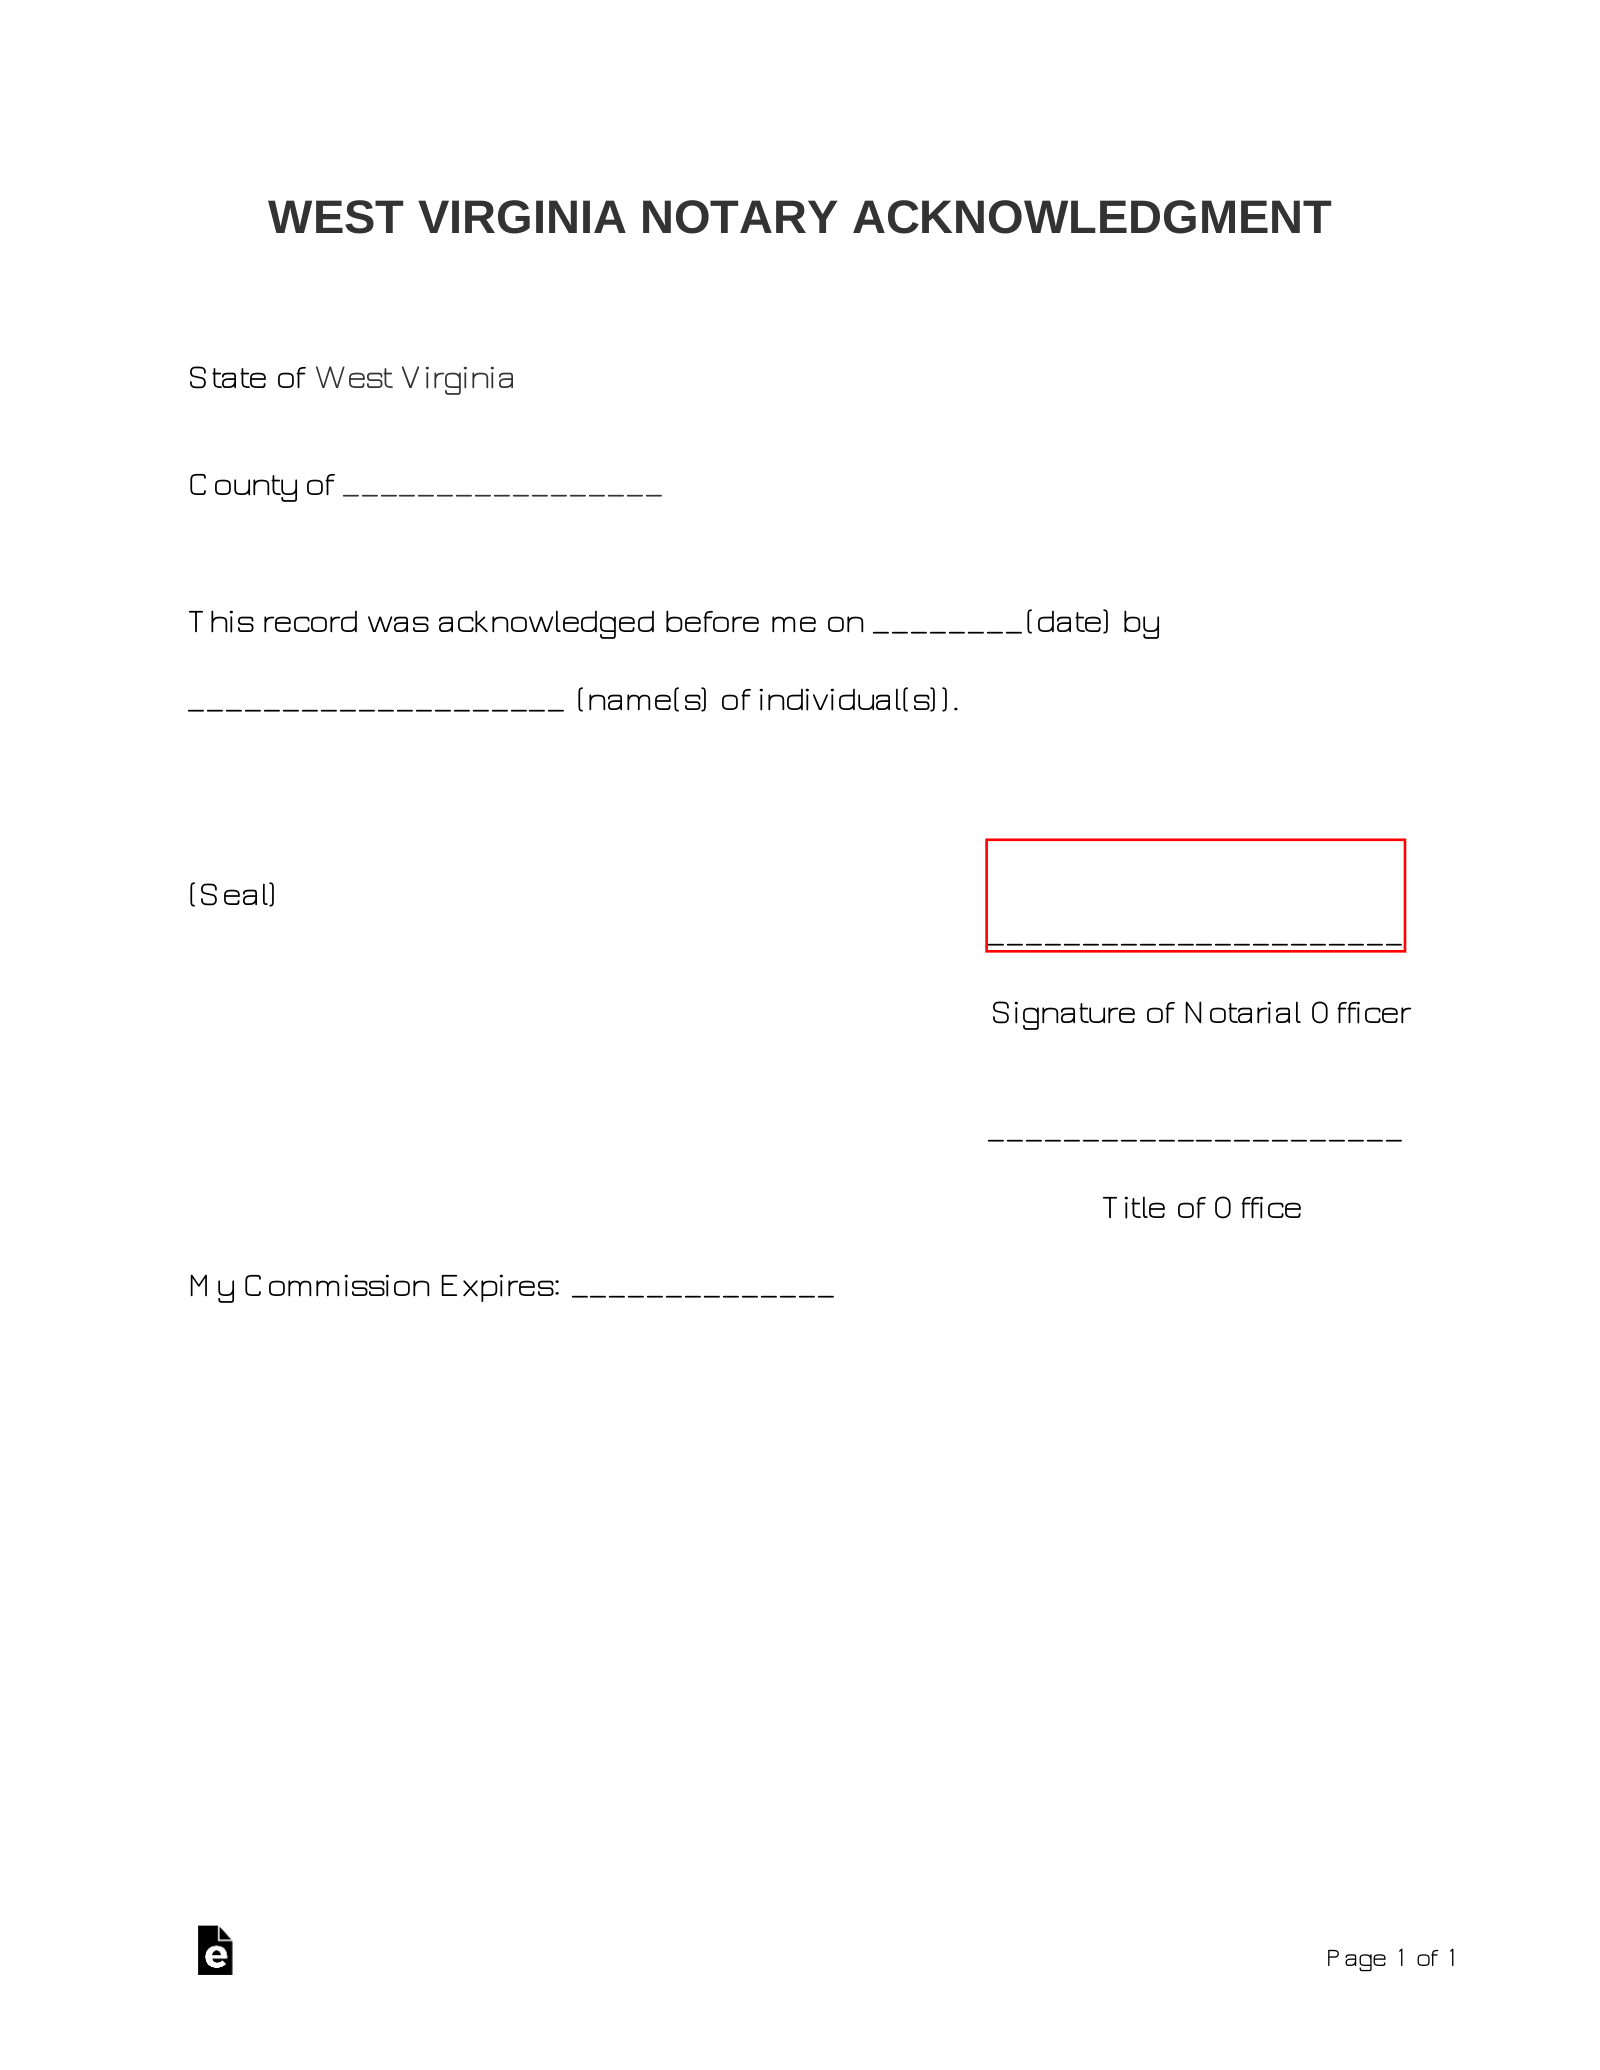 West Virginia Notary Acknowledgment Form